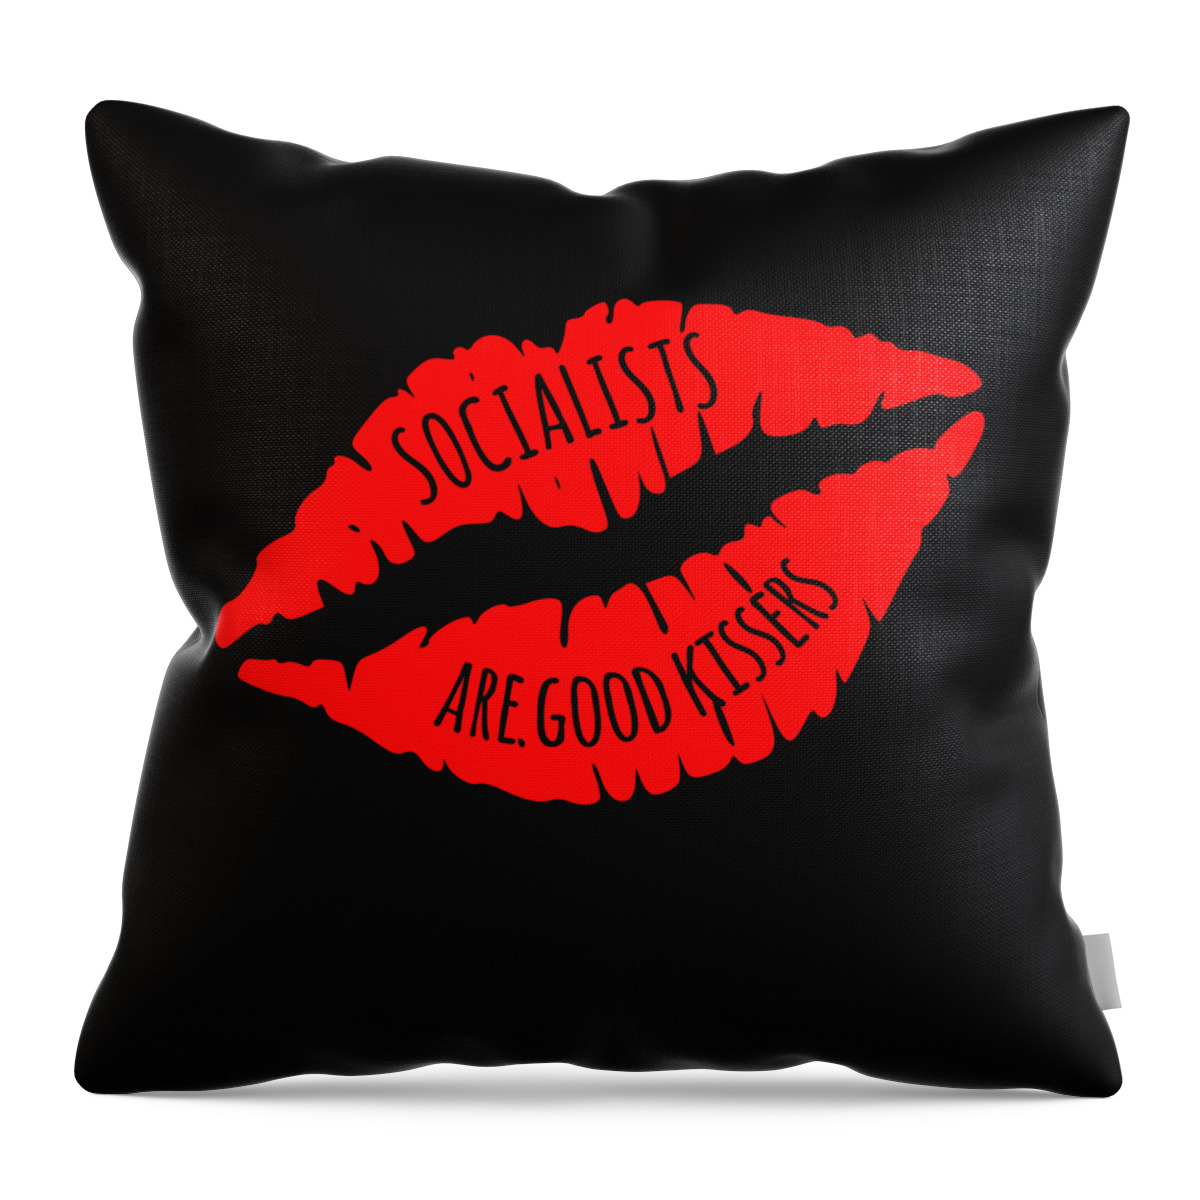 Funny Throw Pillow featuring the digital art Socialists Are Good Kissers by Flippin Sweet Gear